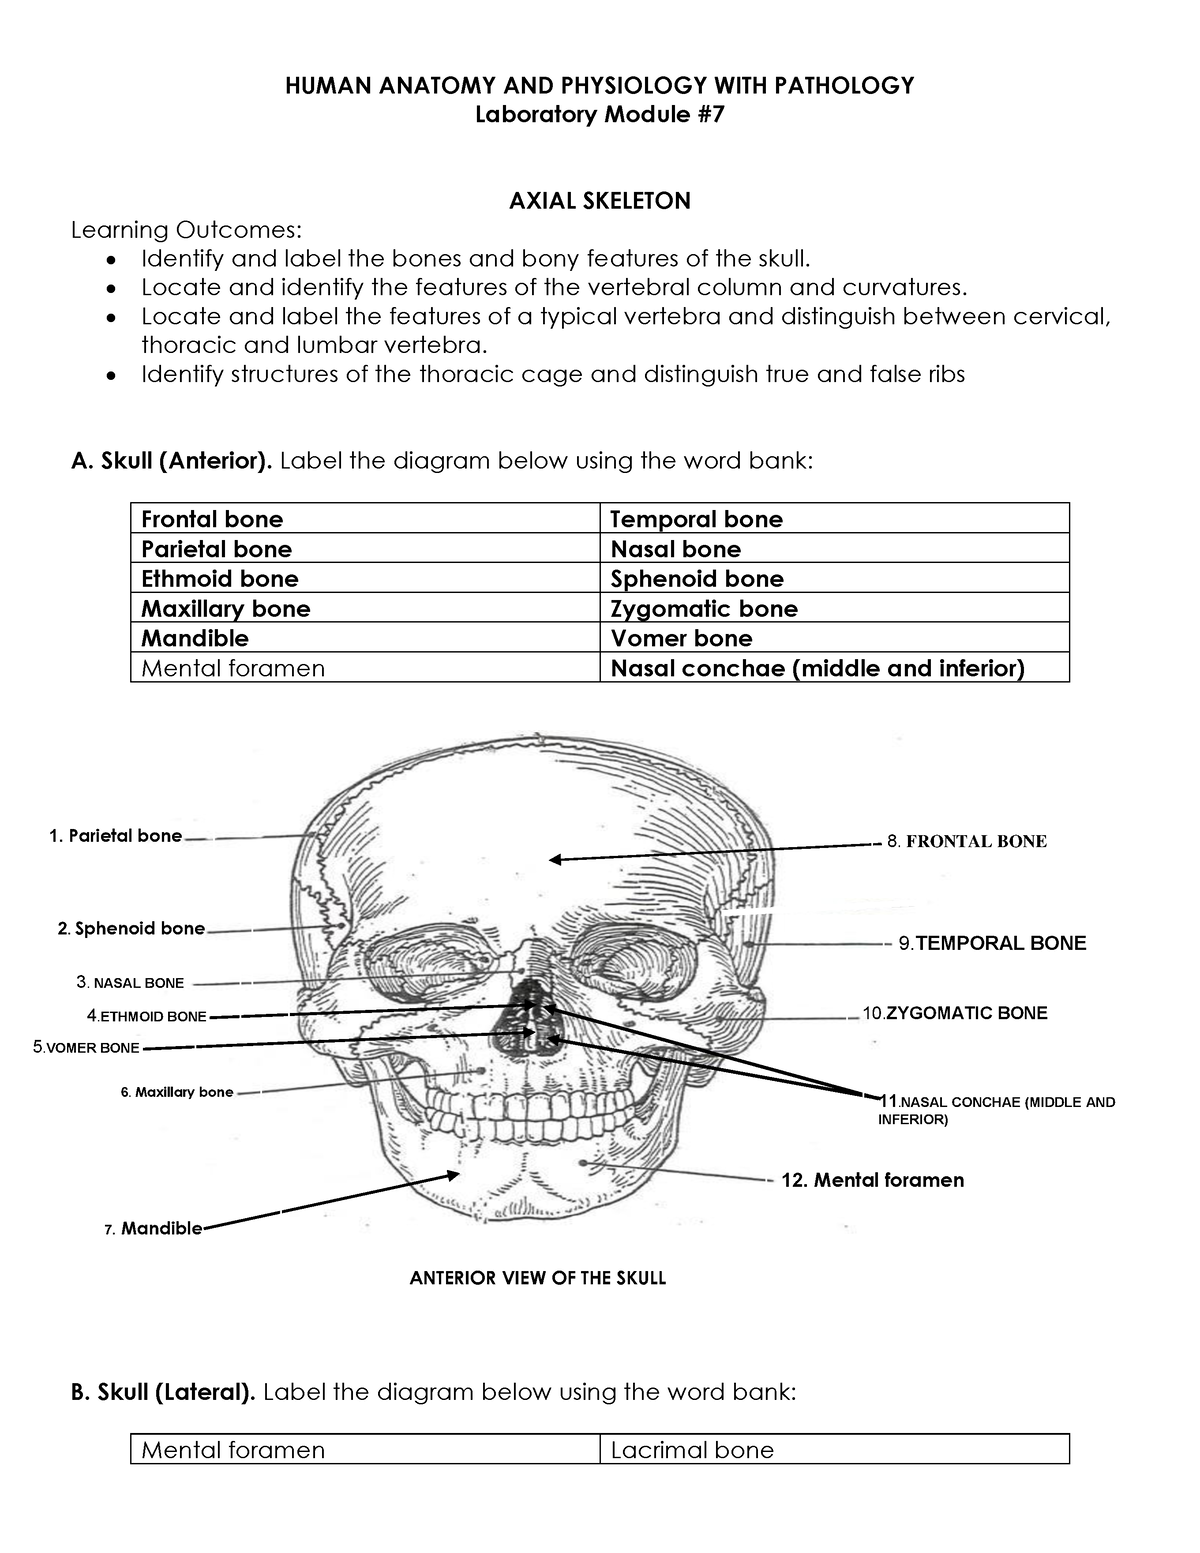 Axial Skeleton - Laboratory Module # 7 AXIAL SKELETON Learning Outcomes ...